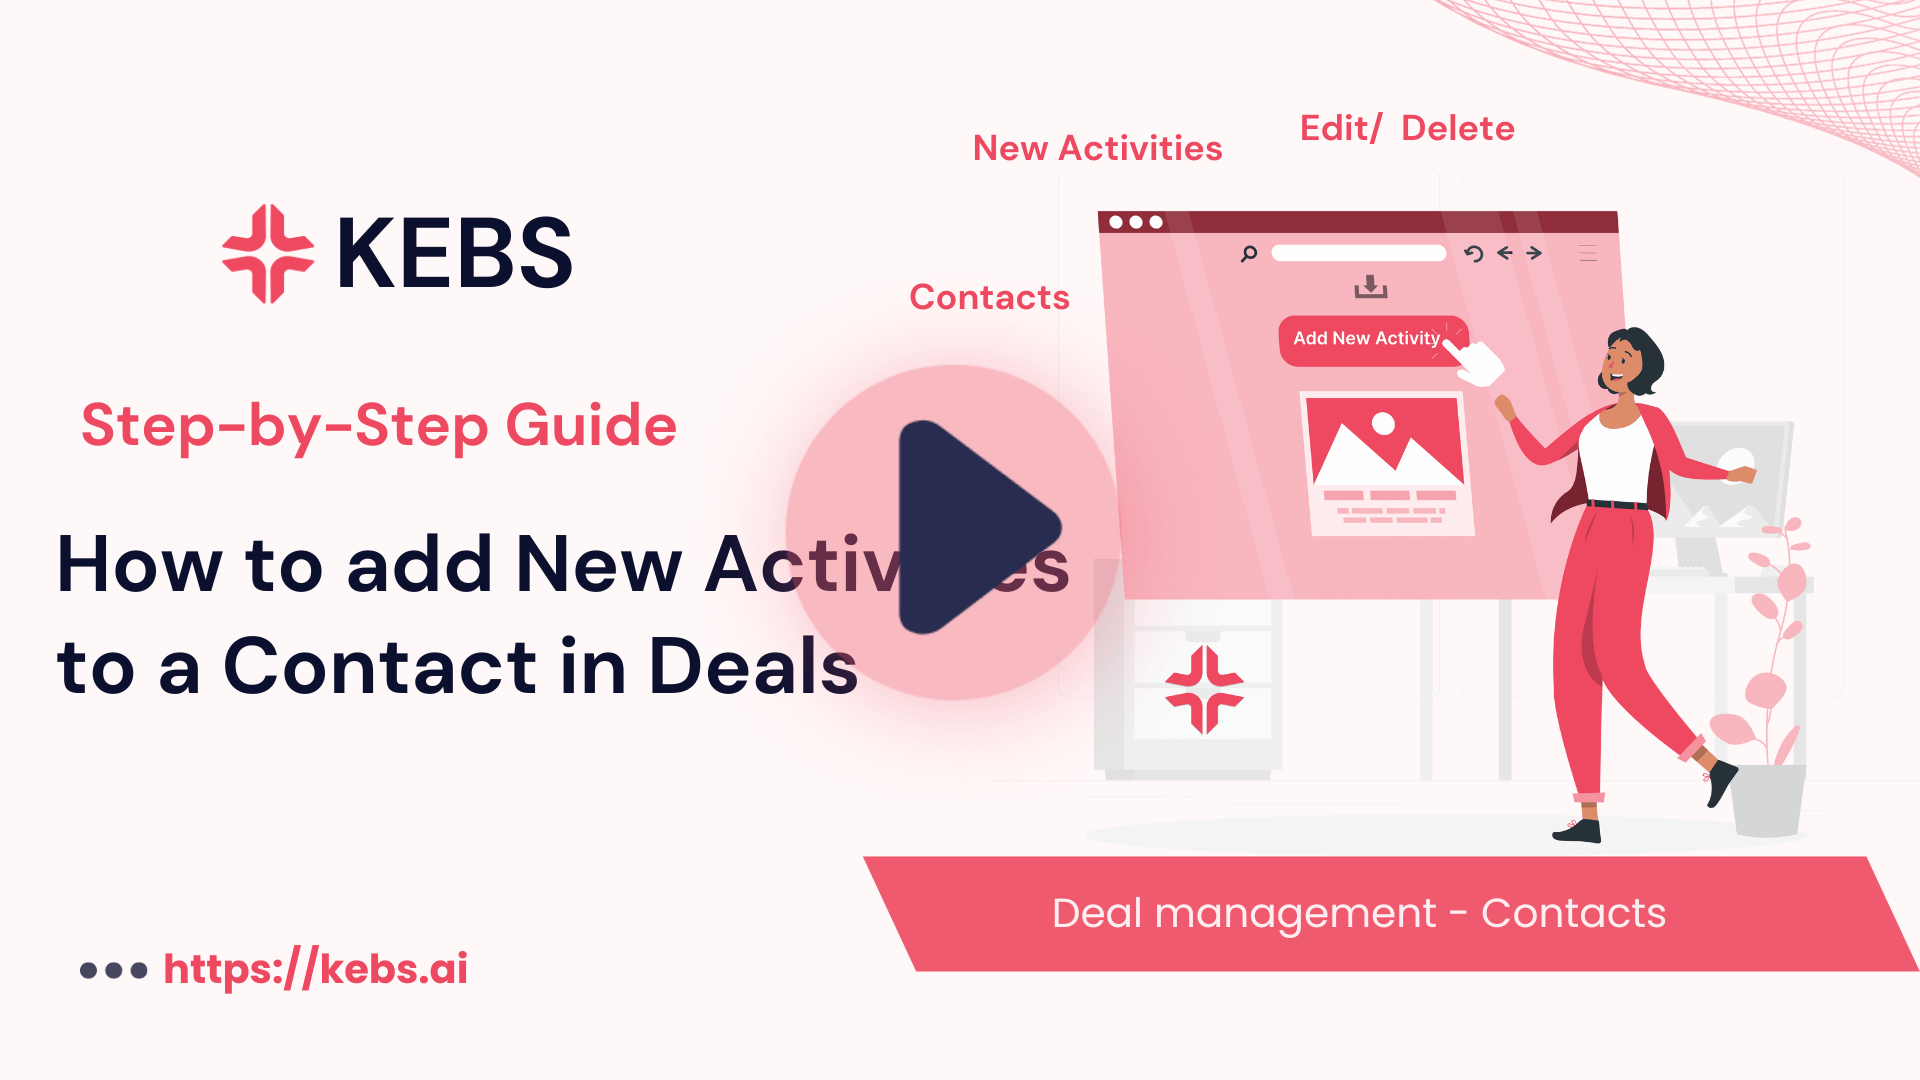 How to add New Activities to a Contact in Deals